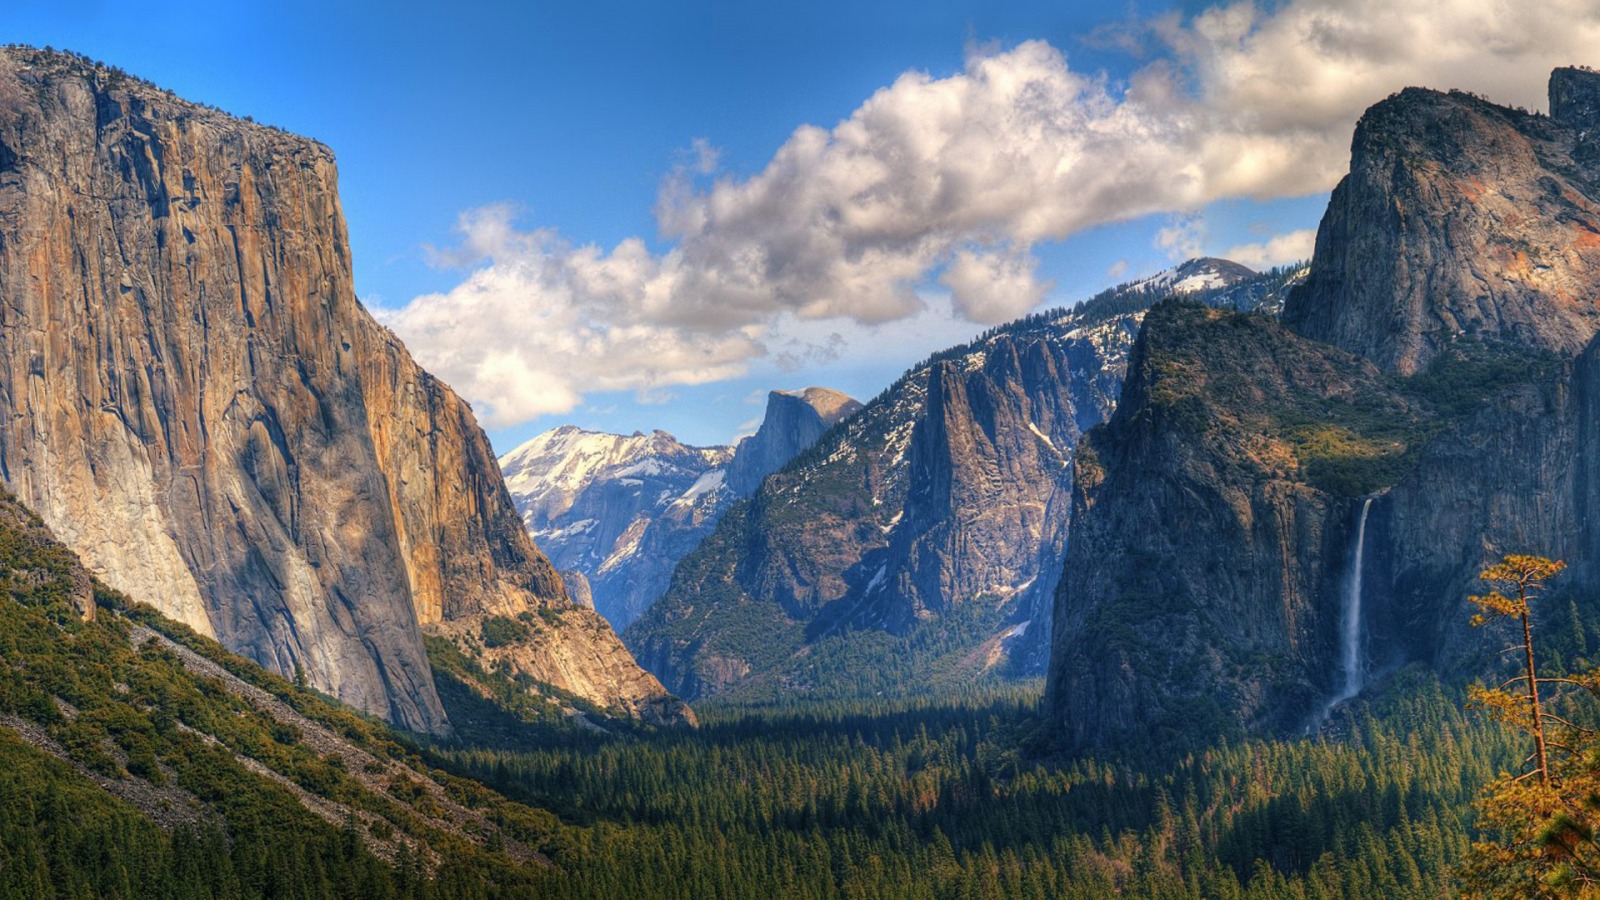 Exclusive Yosemite National Park Wallpapers